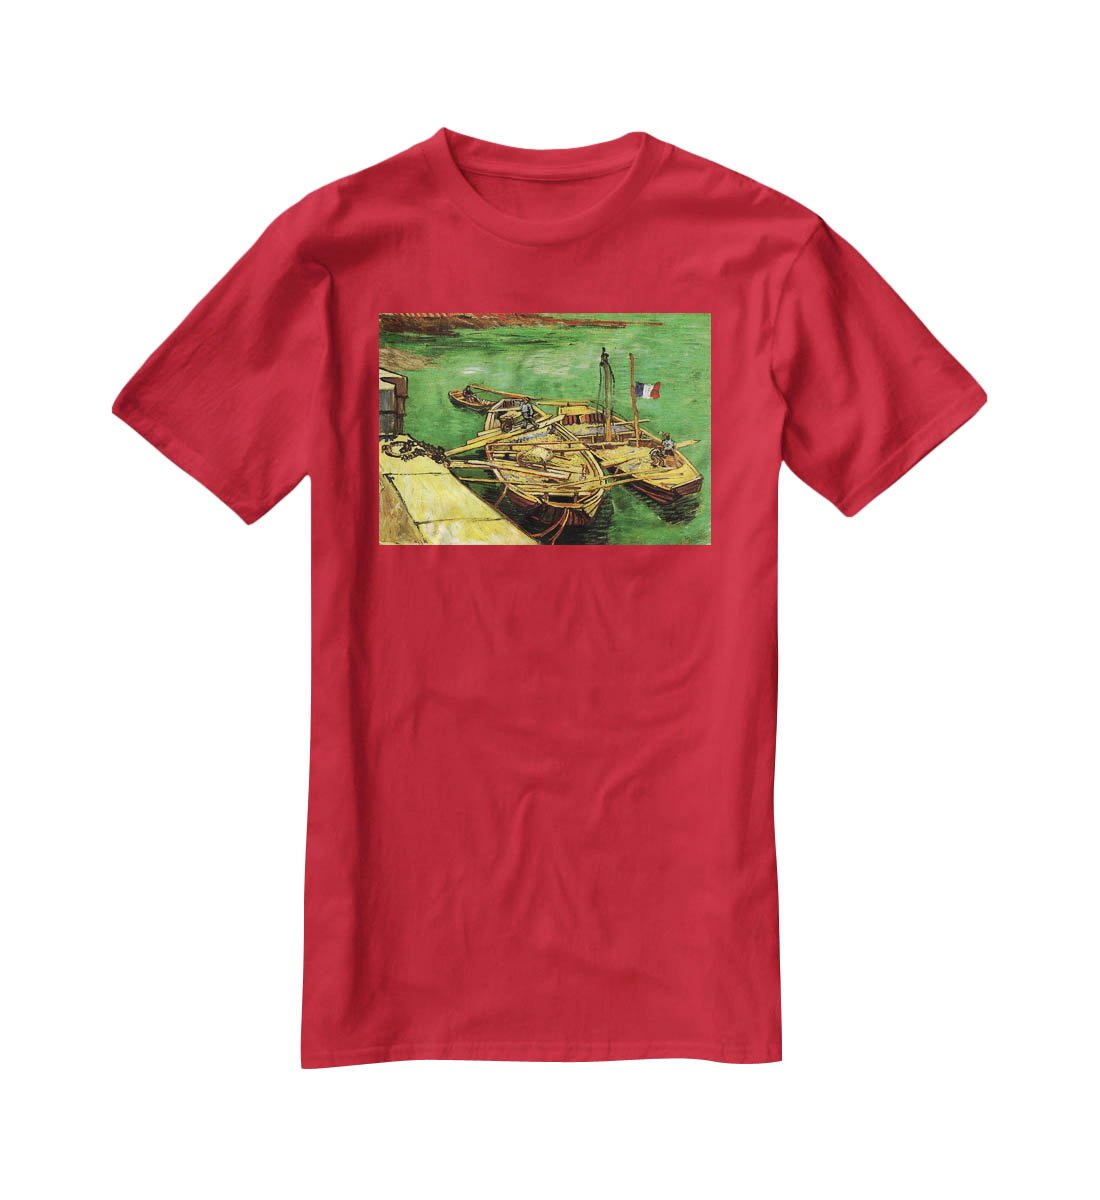 Quay with Men Unloading Sand Barges by Van Gogh T-Shirt - Canvas Art Rocks - 4